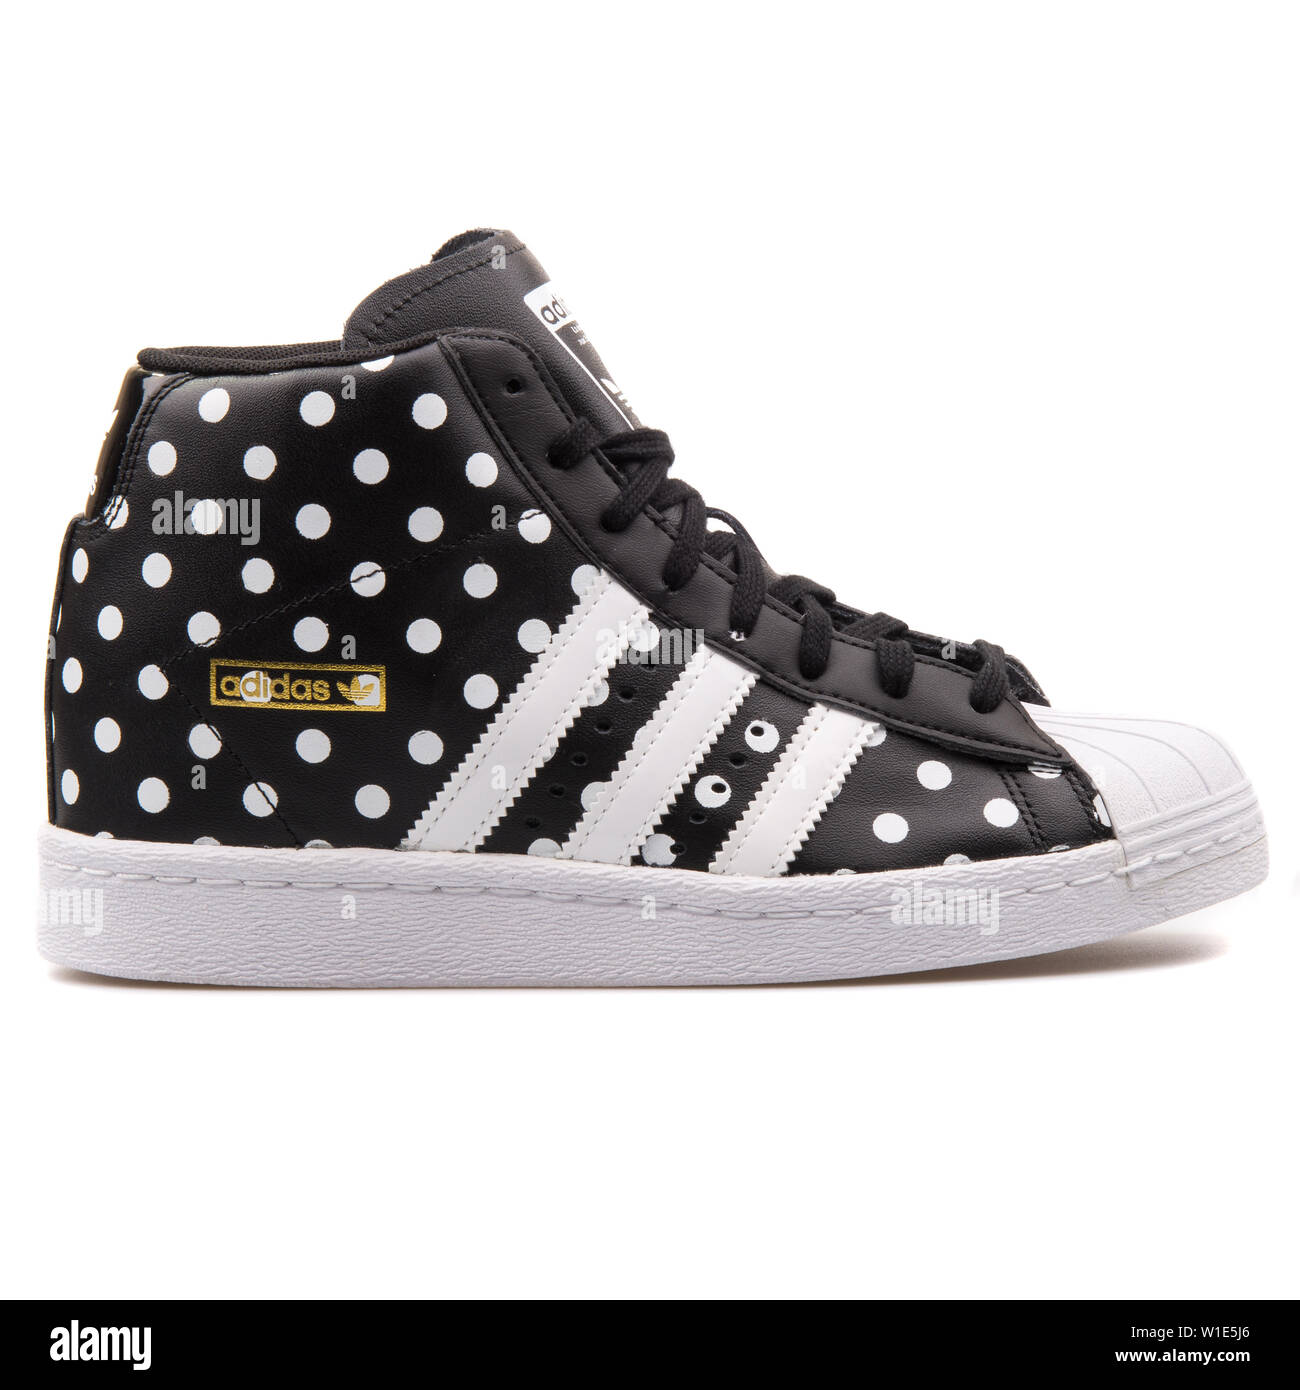 VIENNA, AUSTRIA - AUGUST 25, 2017: Adidas Superstar UP black with white  dots sneaker on white background Stock Photo - Alamy